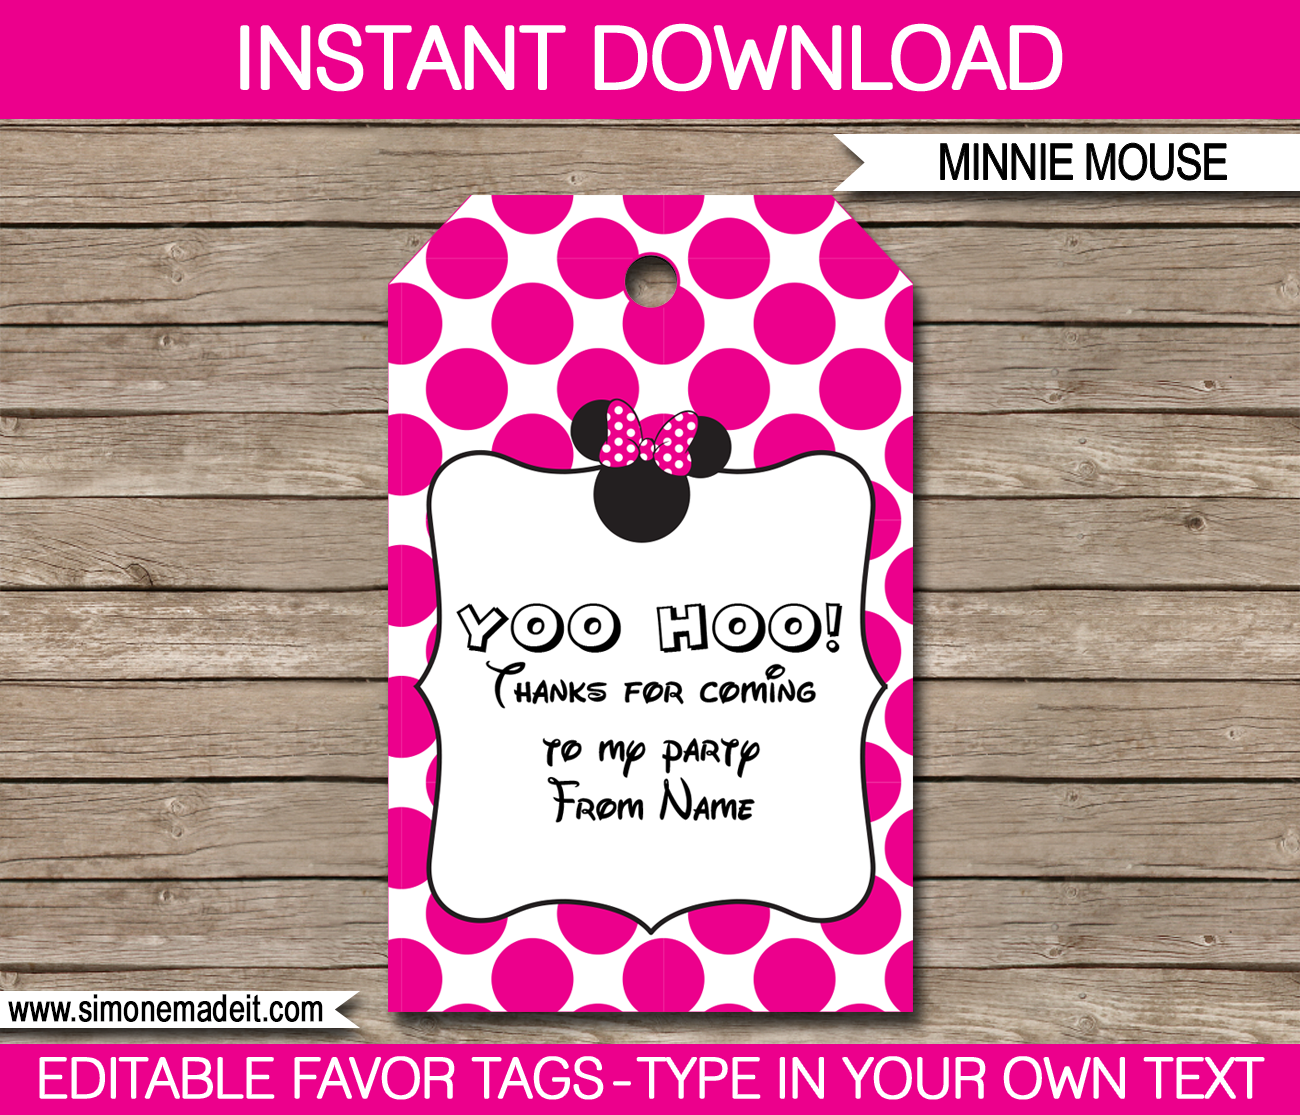 Minnie Mouse Party Favor Tags template - pink